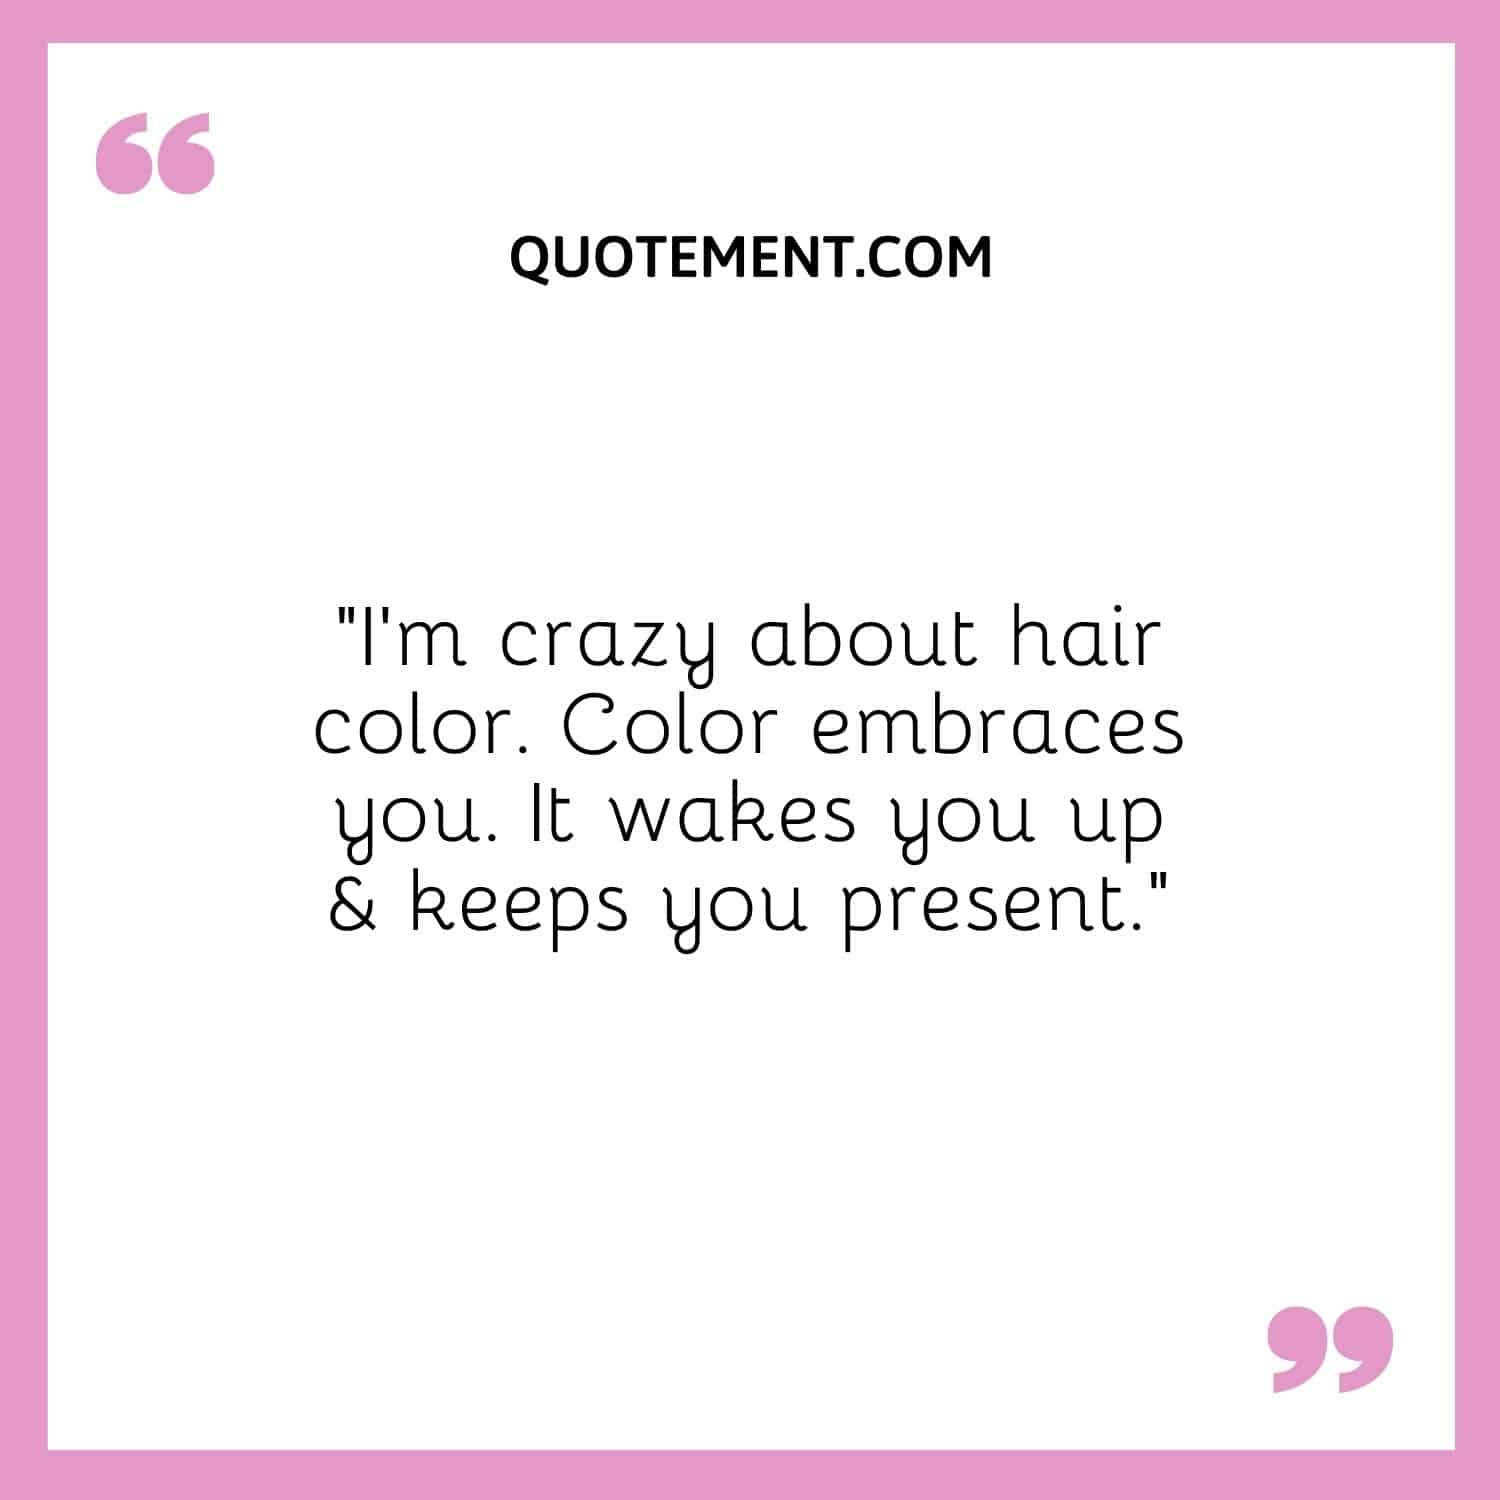 I'm crazy about hair color. Color embraces you. It wakes you up & keeps you present.